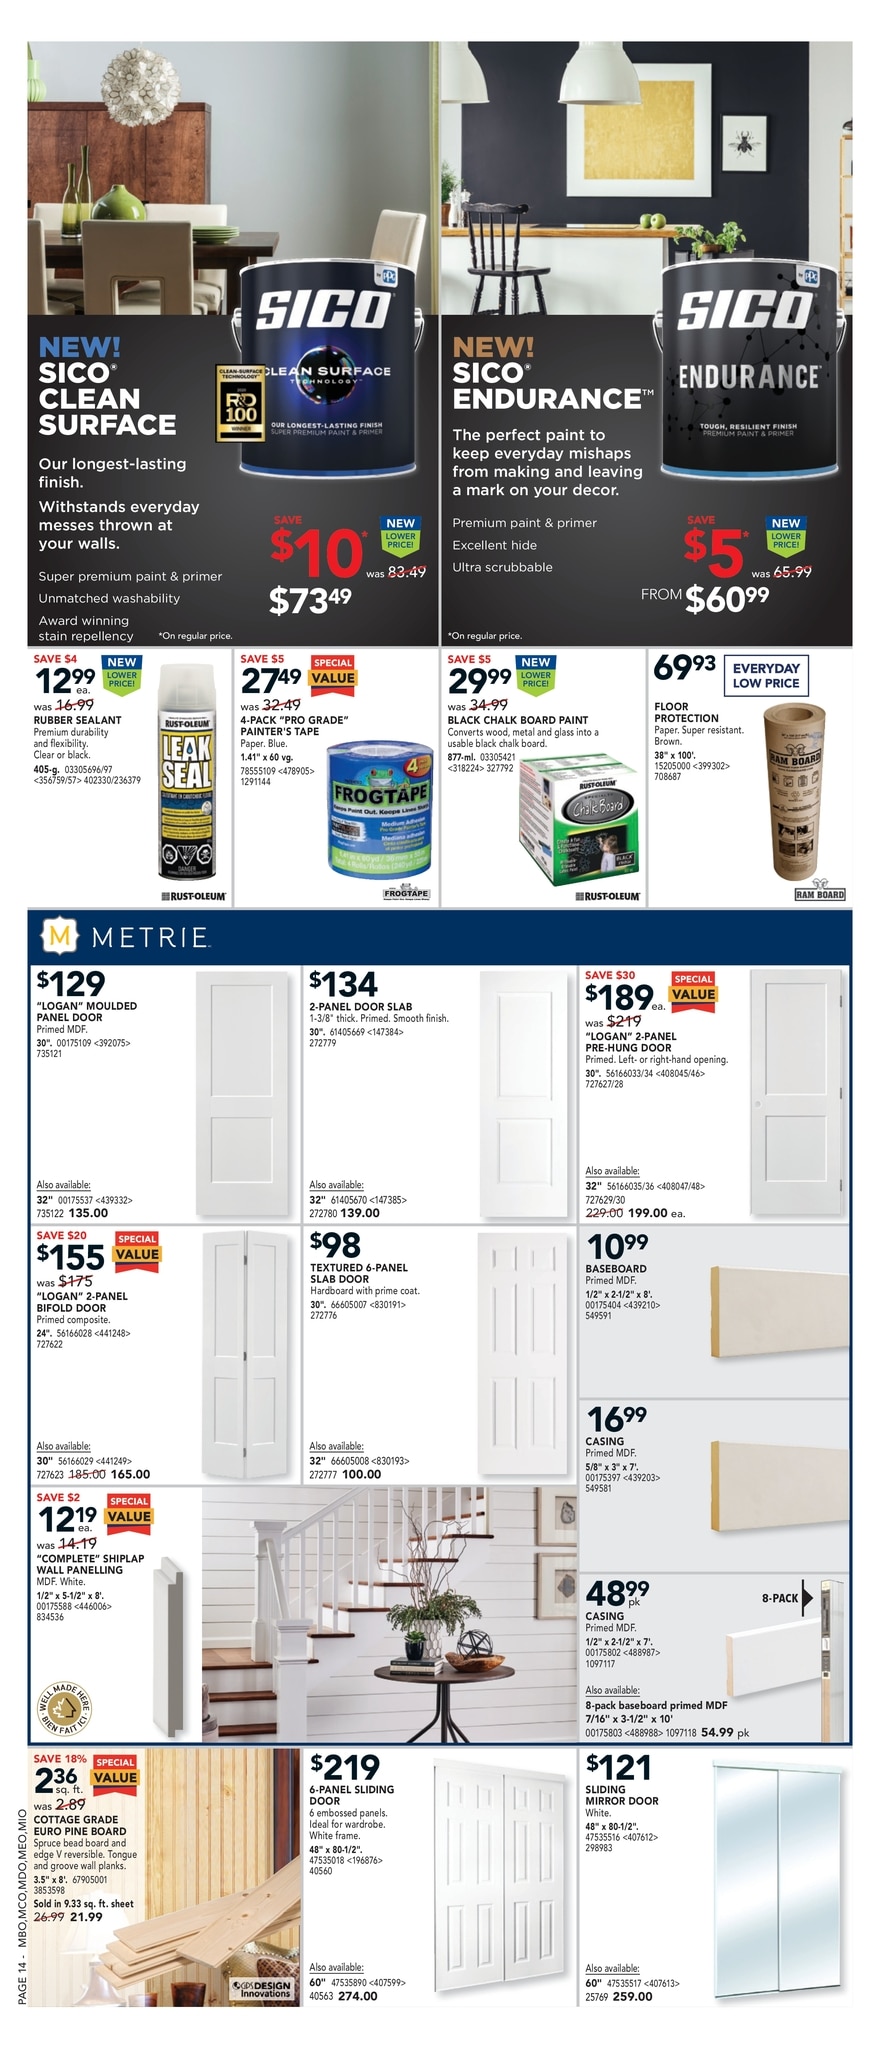 Lowe's - Weekly Flyer Specials - Page 14